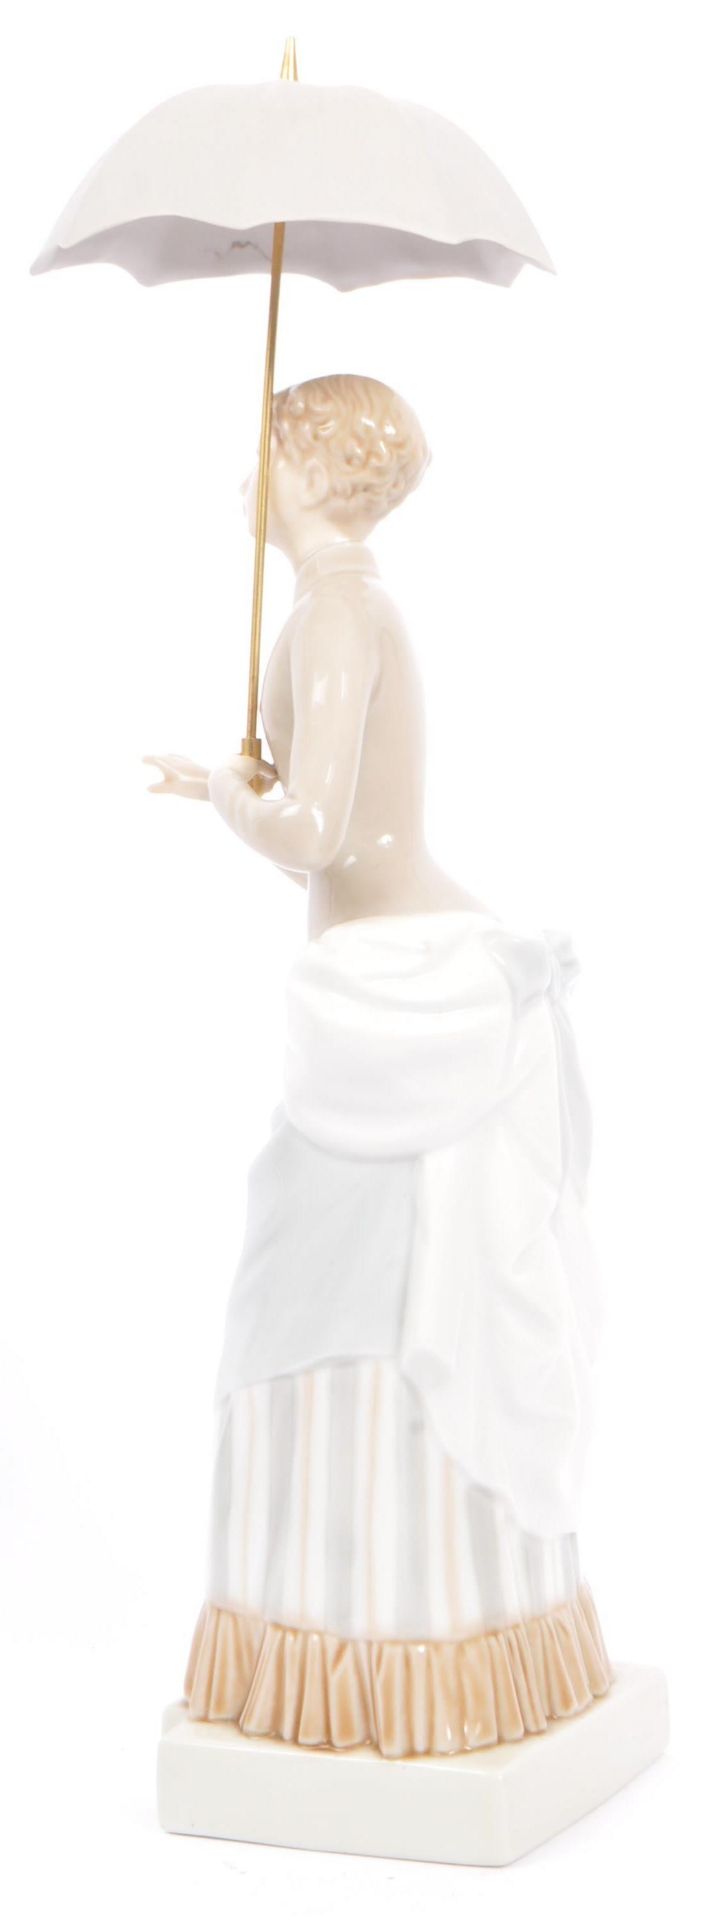 NAO FOR LLADRO - SPANISH PORCELAIN TABLEWARE FIGURES - Image 7 of 8